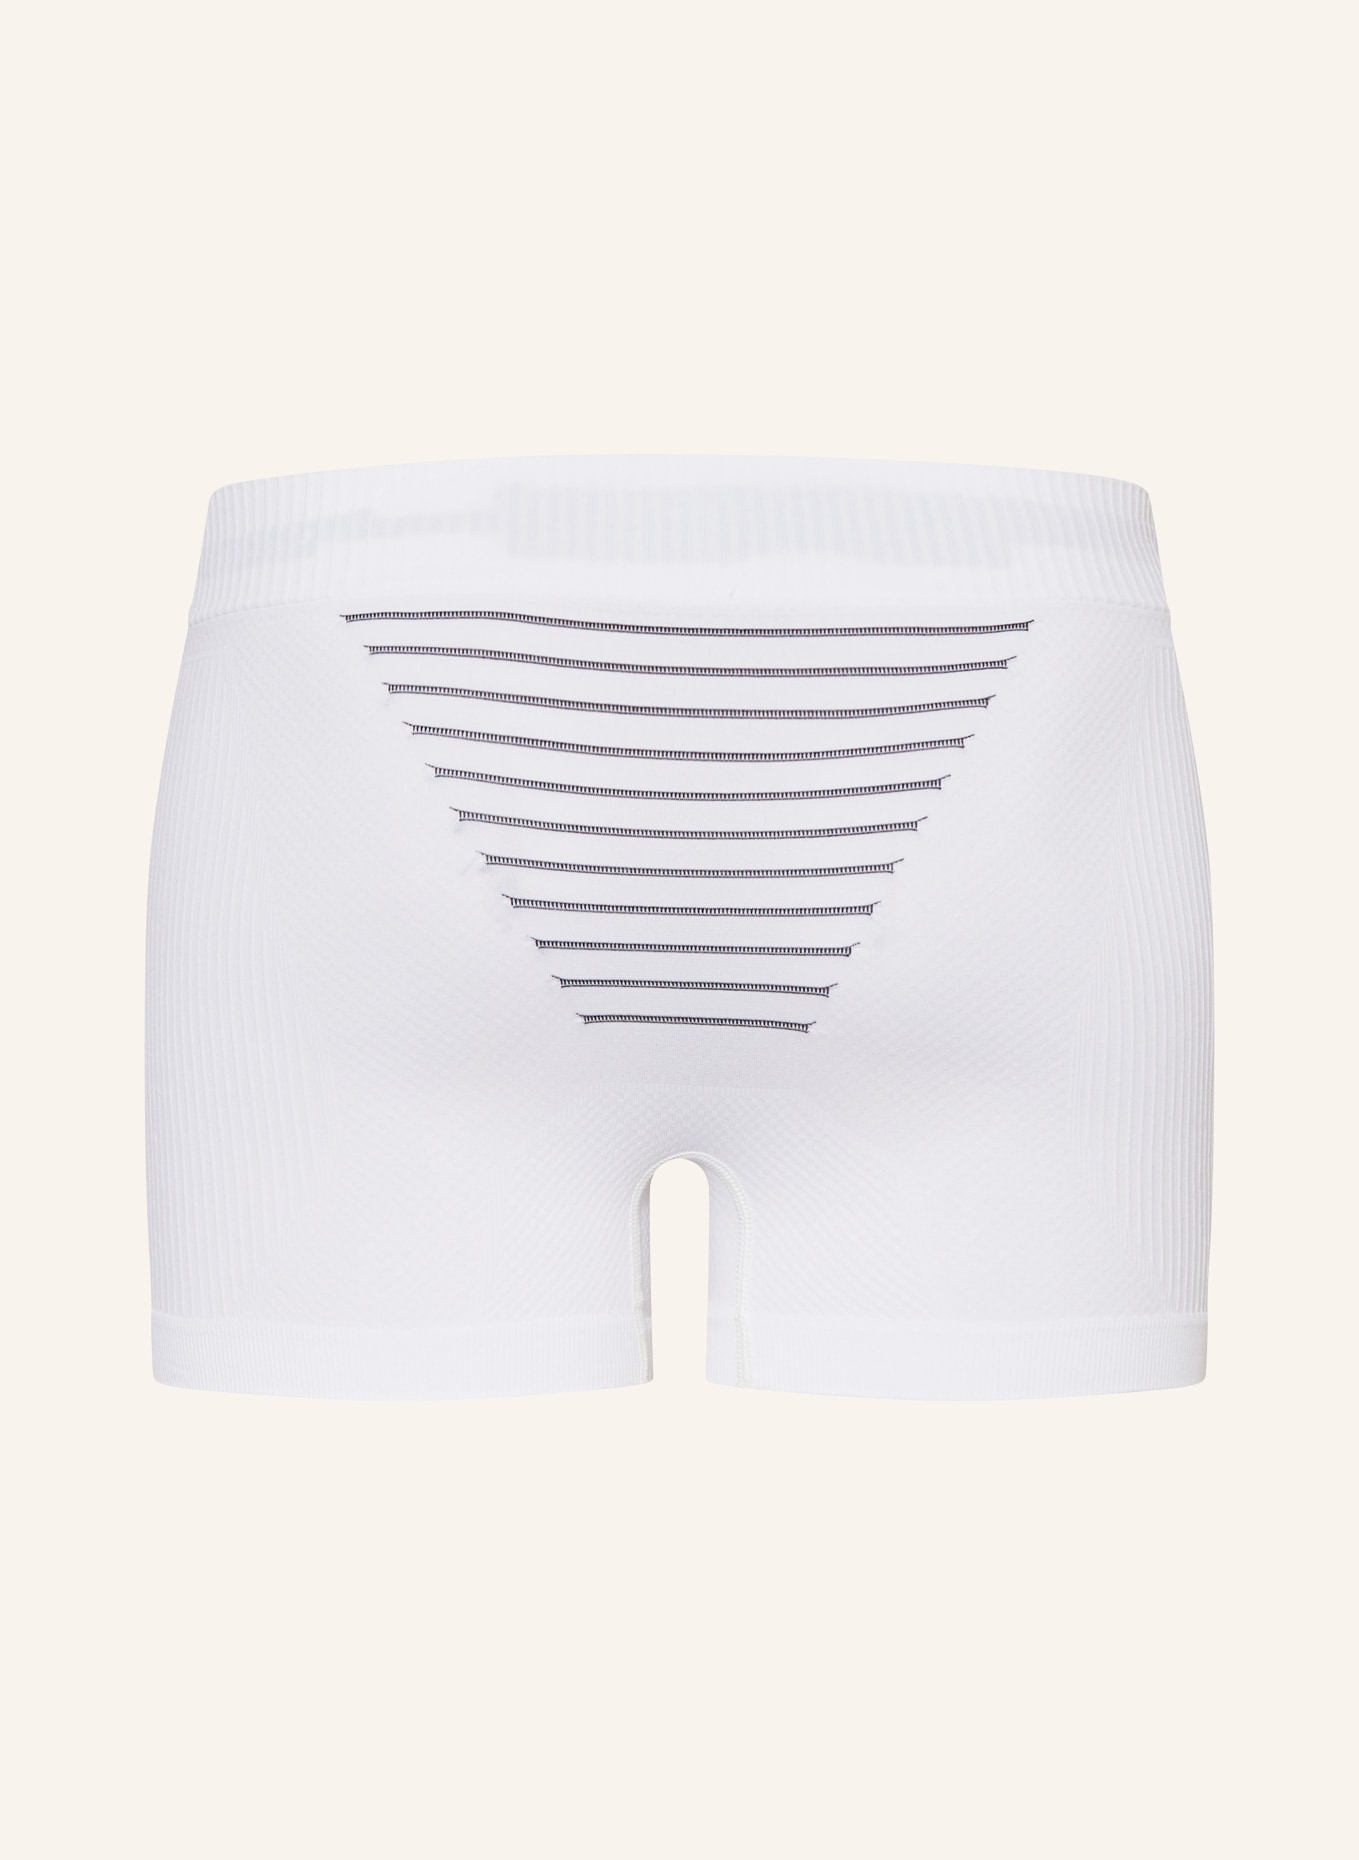 X-BIONIC Functional boxer shorts X-BIONIC® INVENT 4.0, Color: WHITE (Image 2)